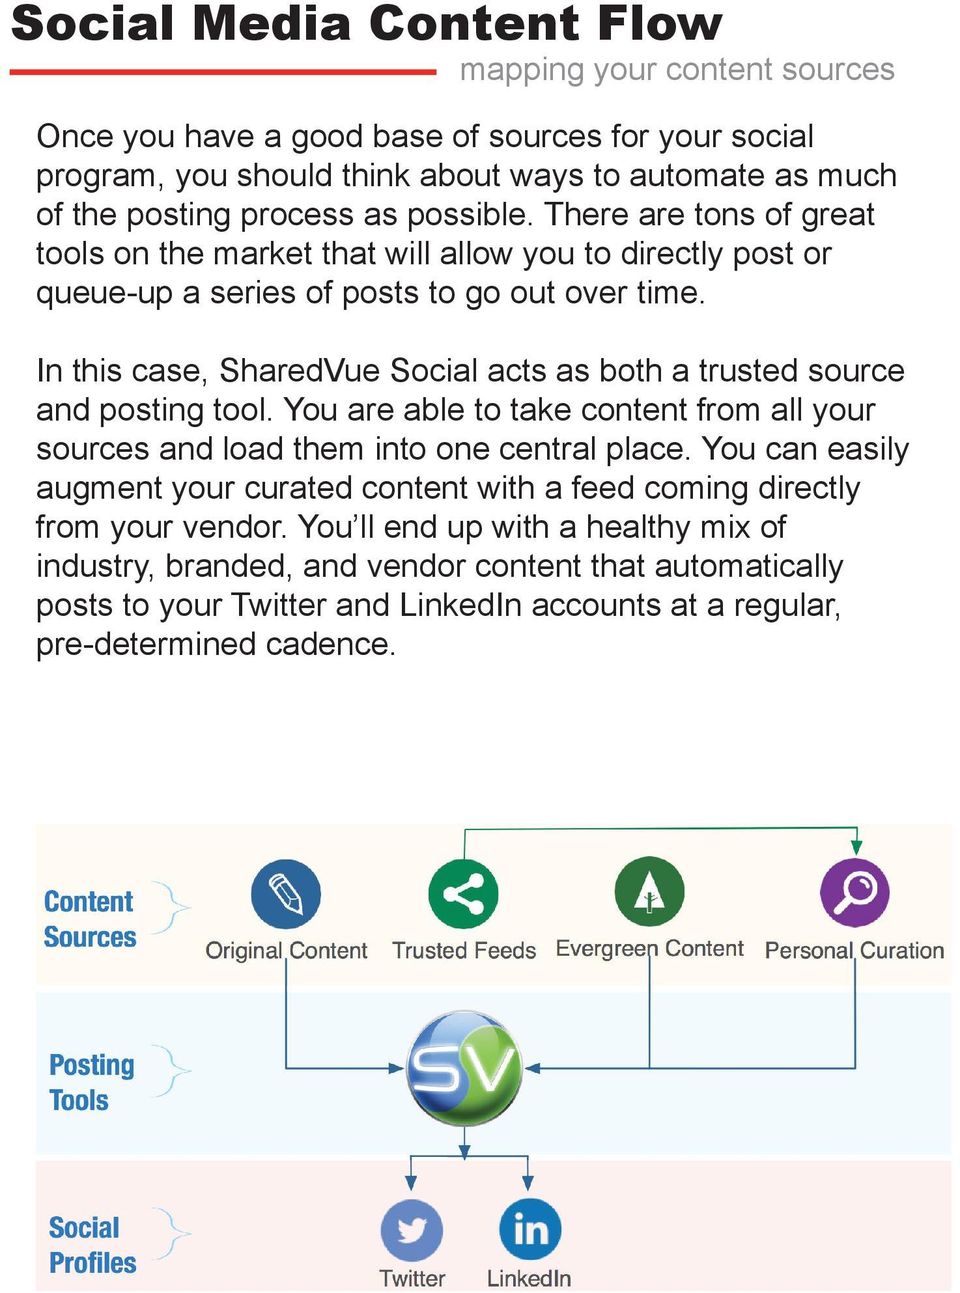 In this case, SharedVue Social acts as both a trusted source and posting tool. You are able to take content from all your sources and load them into one central place.